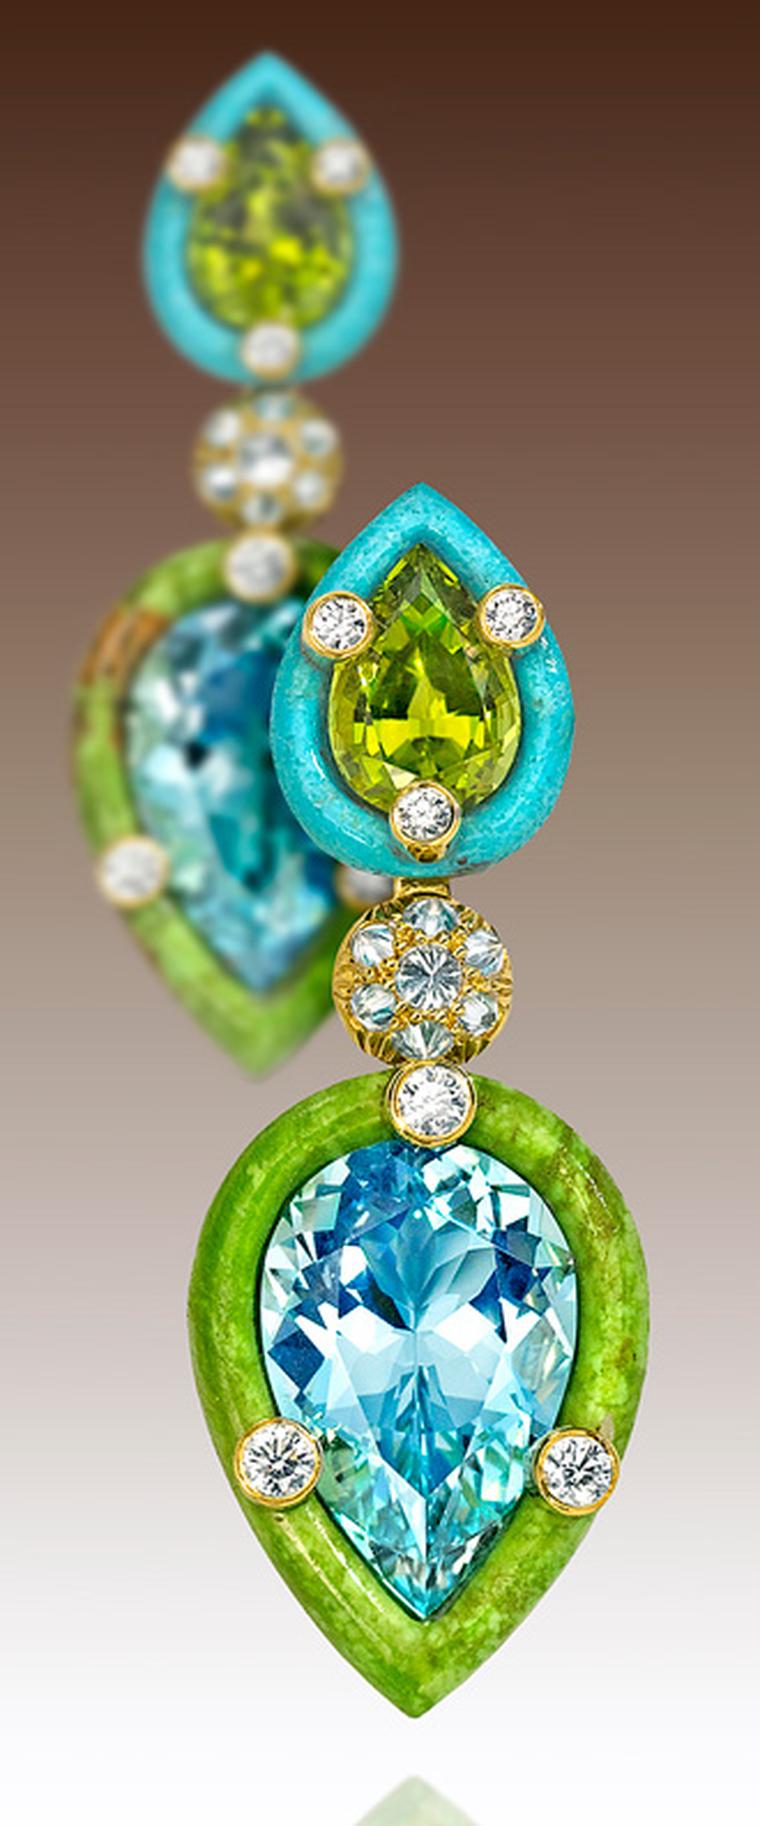 Nicholas Varney 2013 'Duo' earrings featuring two pear-shape aquamarines set into hand-carved gaspeite, paired with two pear-shaped peridots set into hand-carved turquoise and joined by yellow gold and diamonds